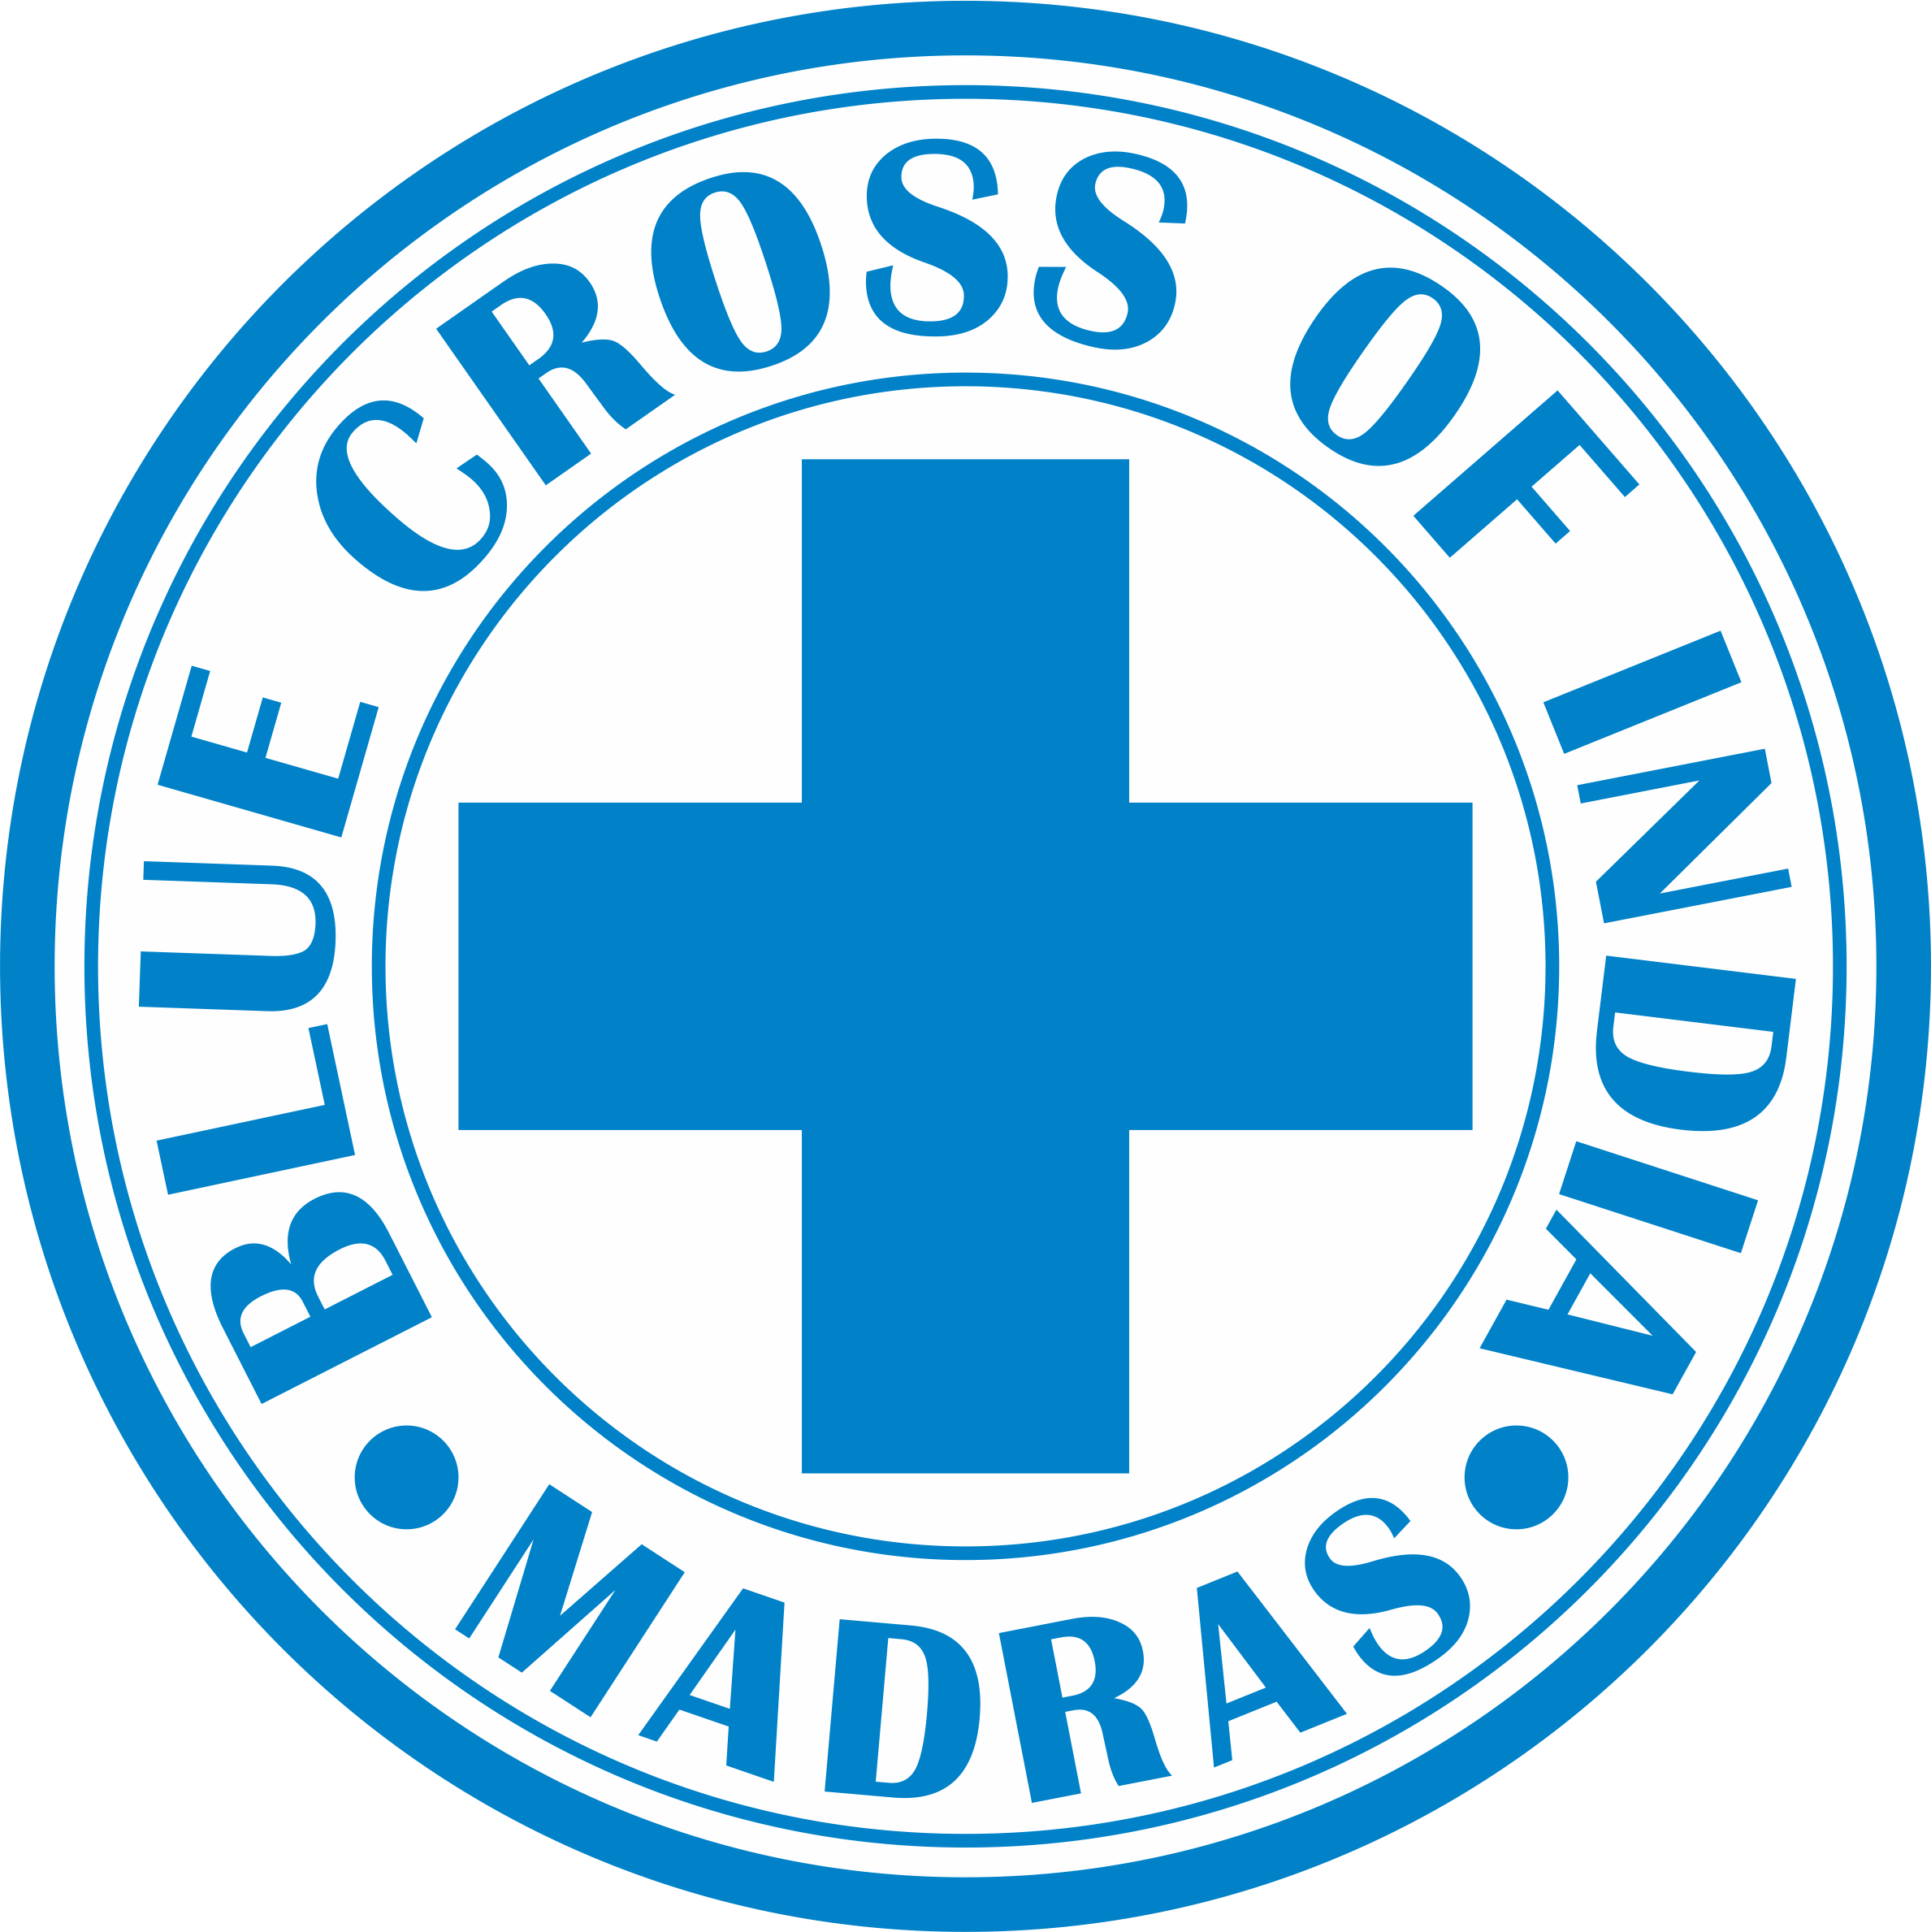 Watch with Blue Cross Logo - Rescue of animals by Blue Cross of India in Chennai